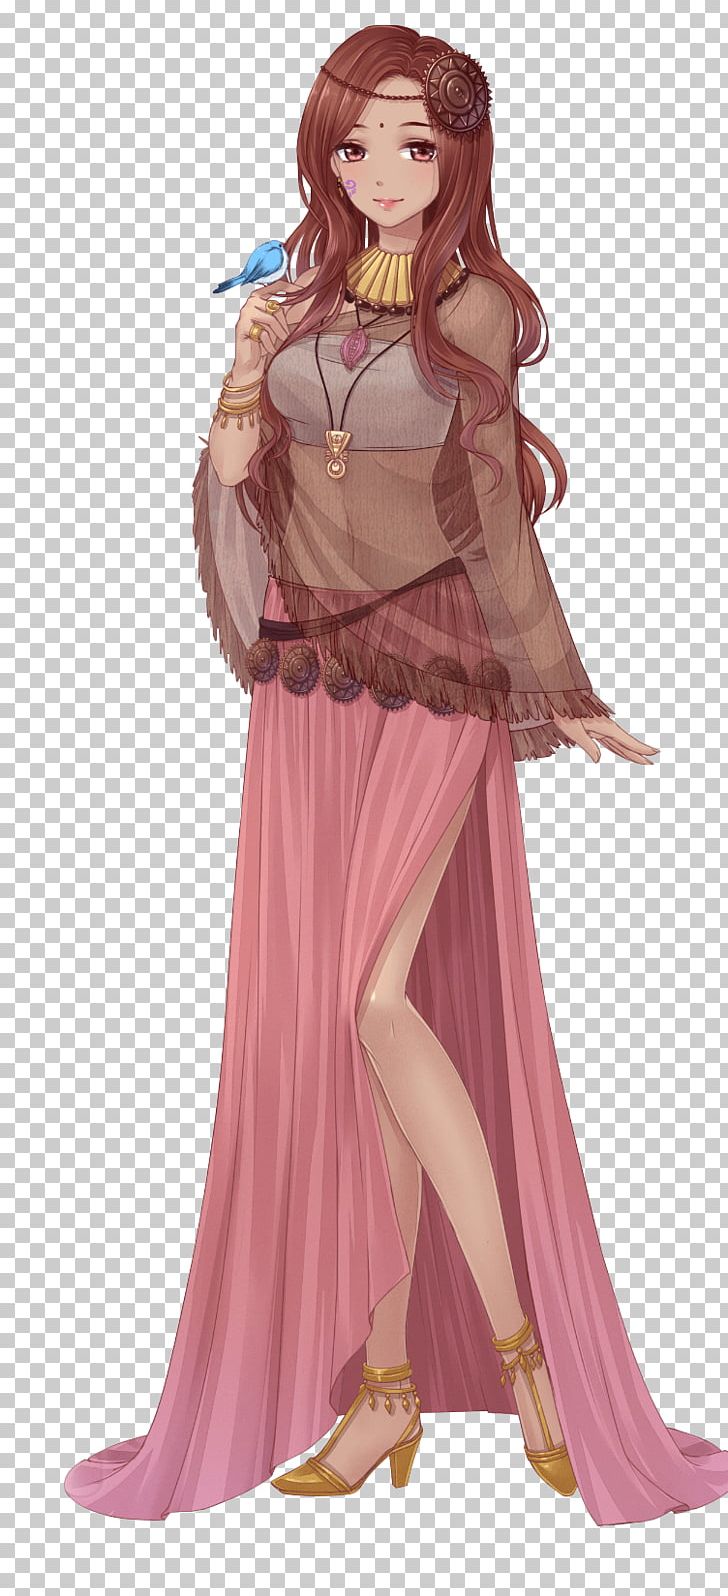 Anime Drawing Manga Miracle Nikki PNG, Clipart, Anime, Art, Brown Hair, Clothing, Costume Free PNG Download